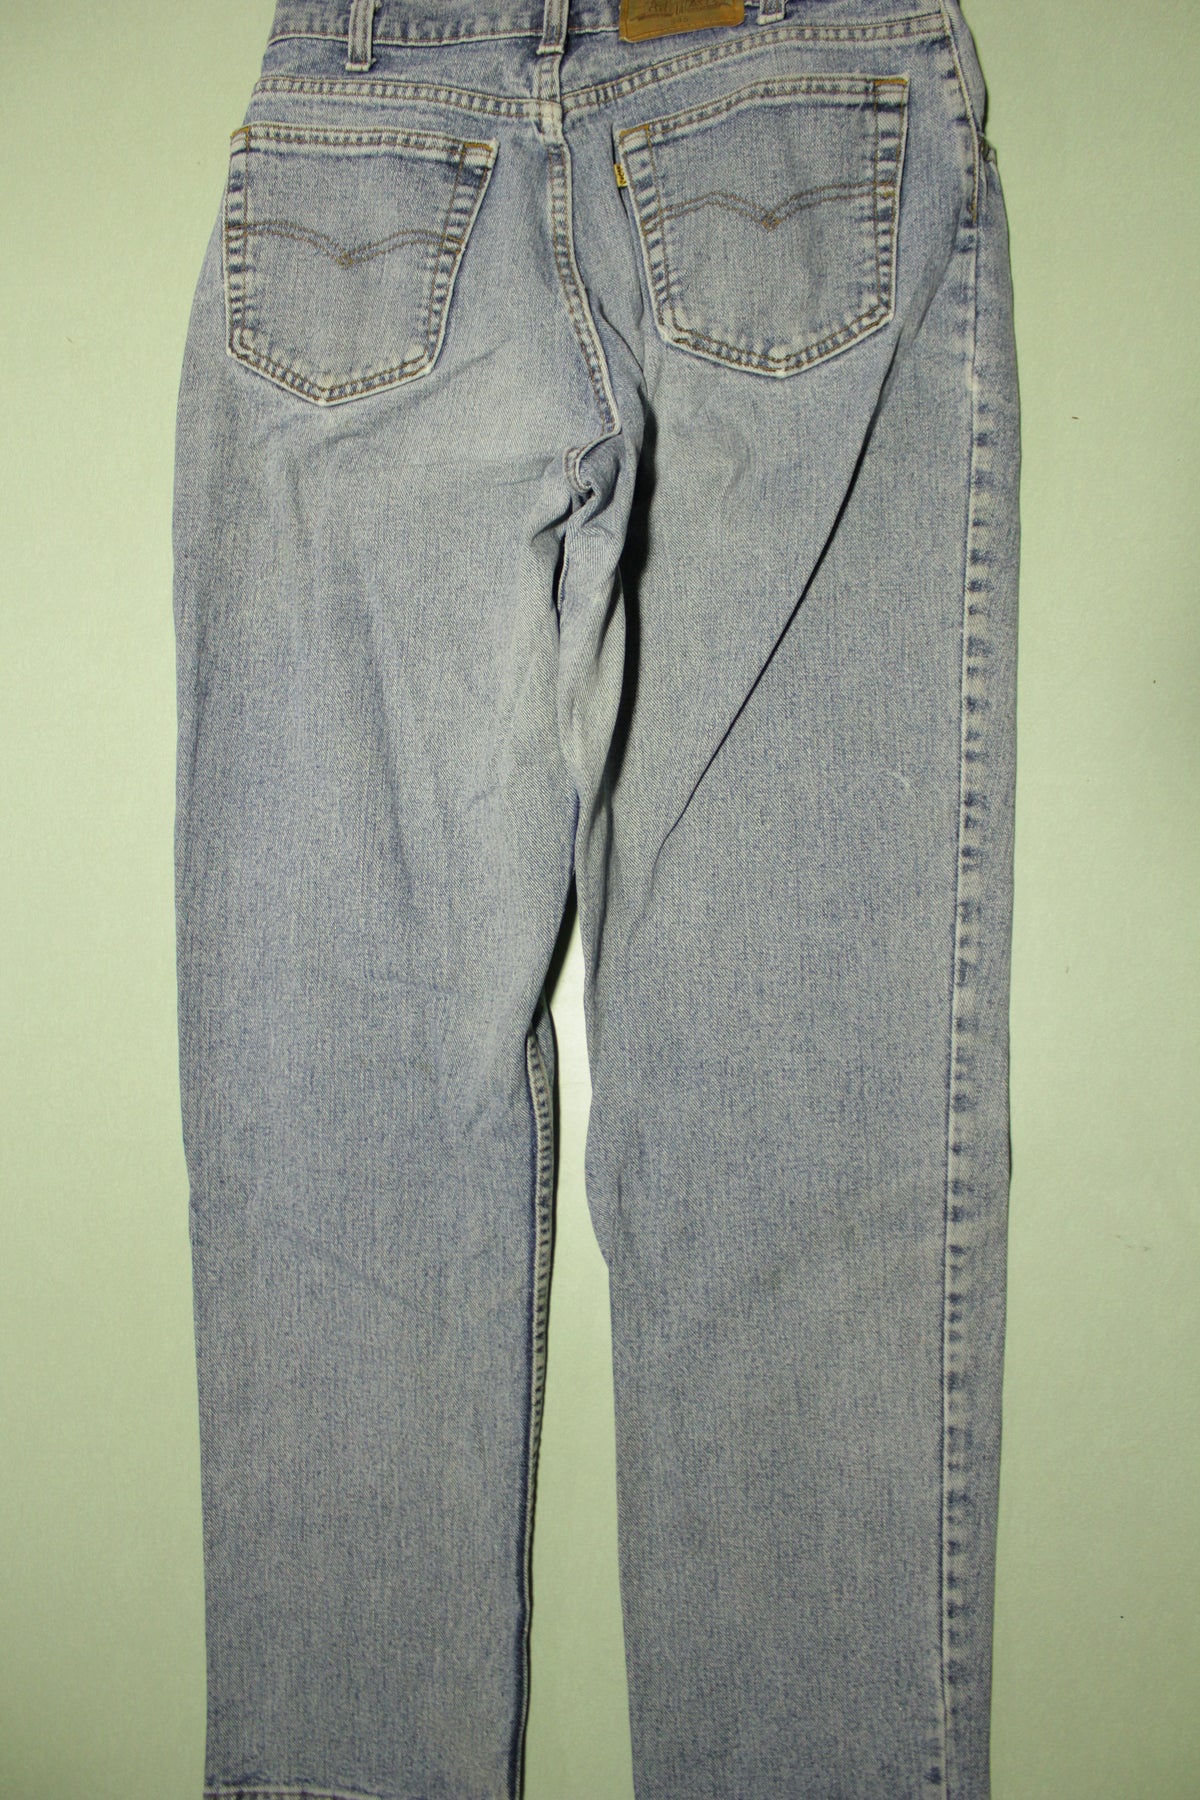 Levis 90s 545 Loose Fit Straight Leg Jeans. Vintage Grunge Punk Made in USA 32x33